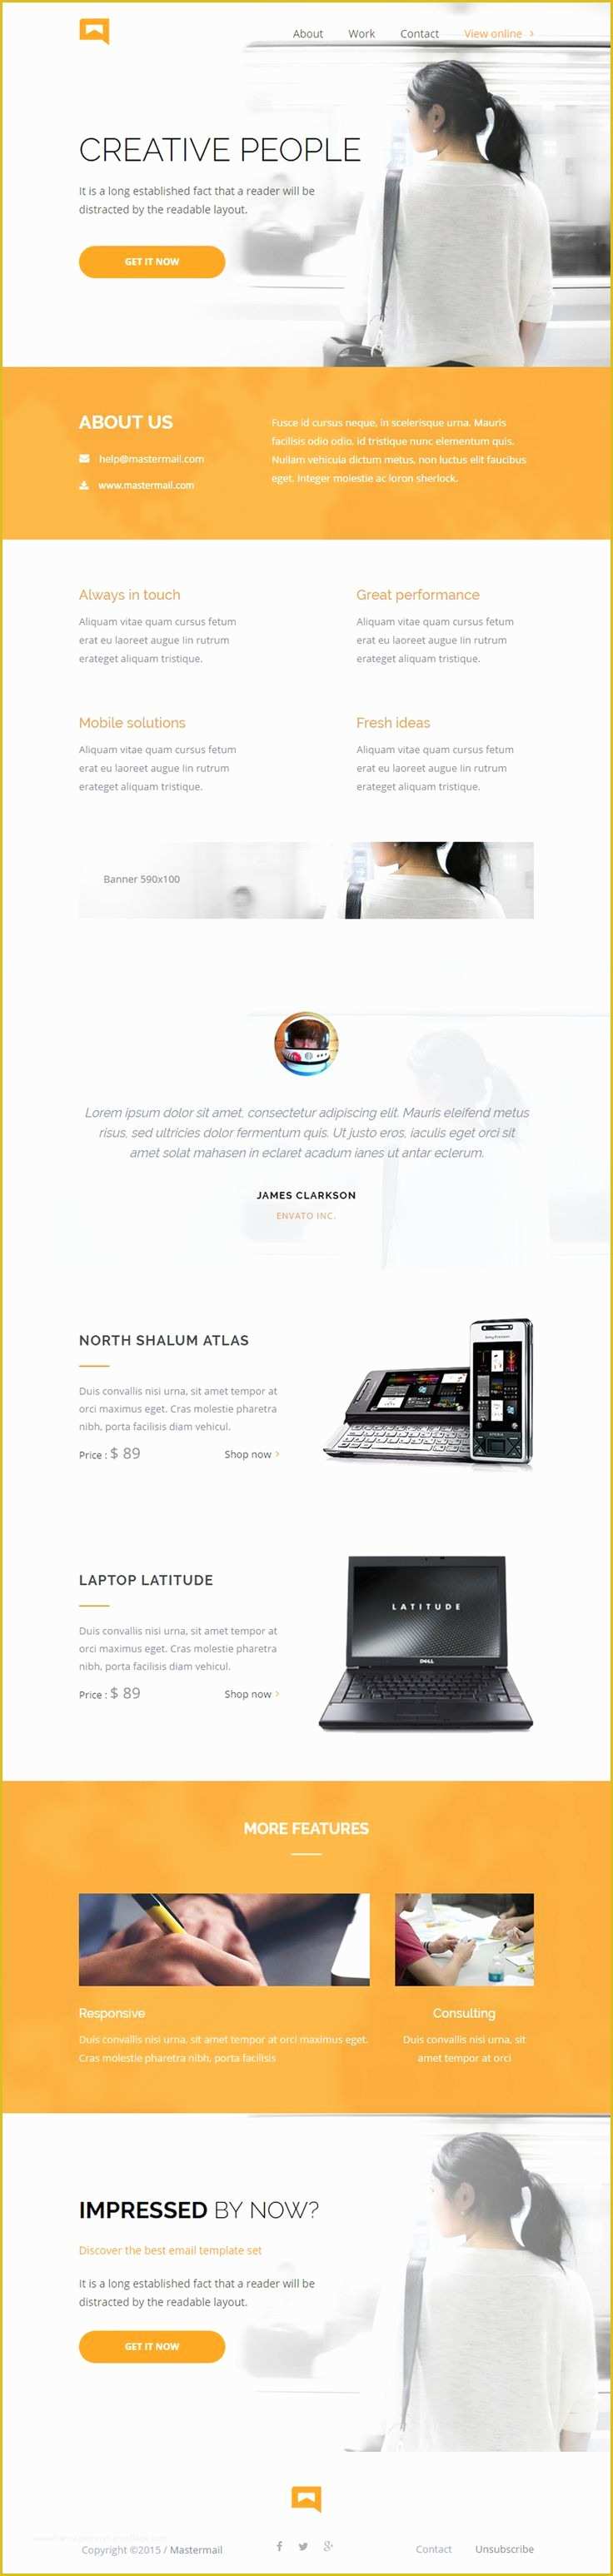 Free Responsive Email Template Mailchimp Of 1000 Ideas About Email Templates On Pinterest